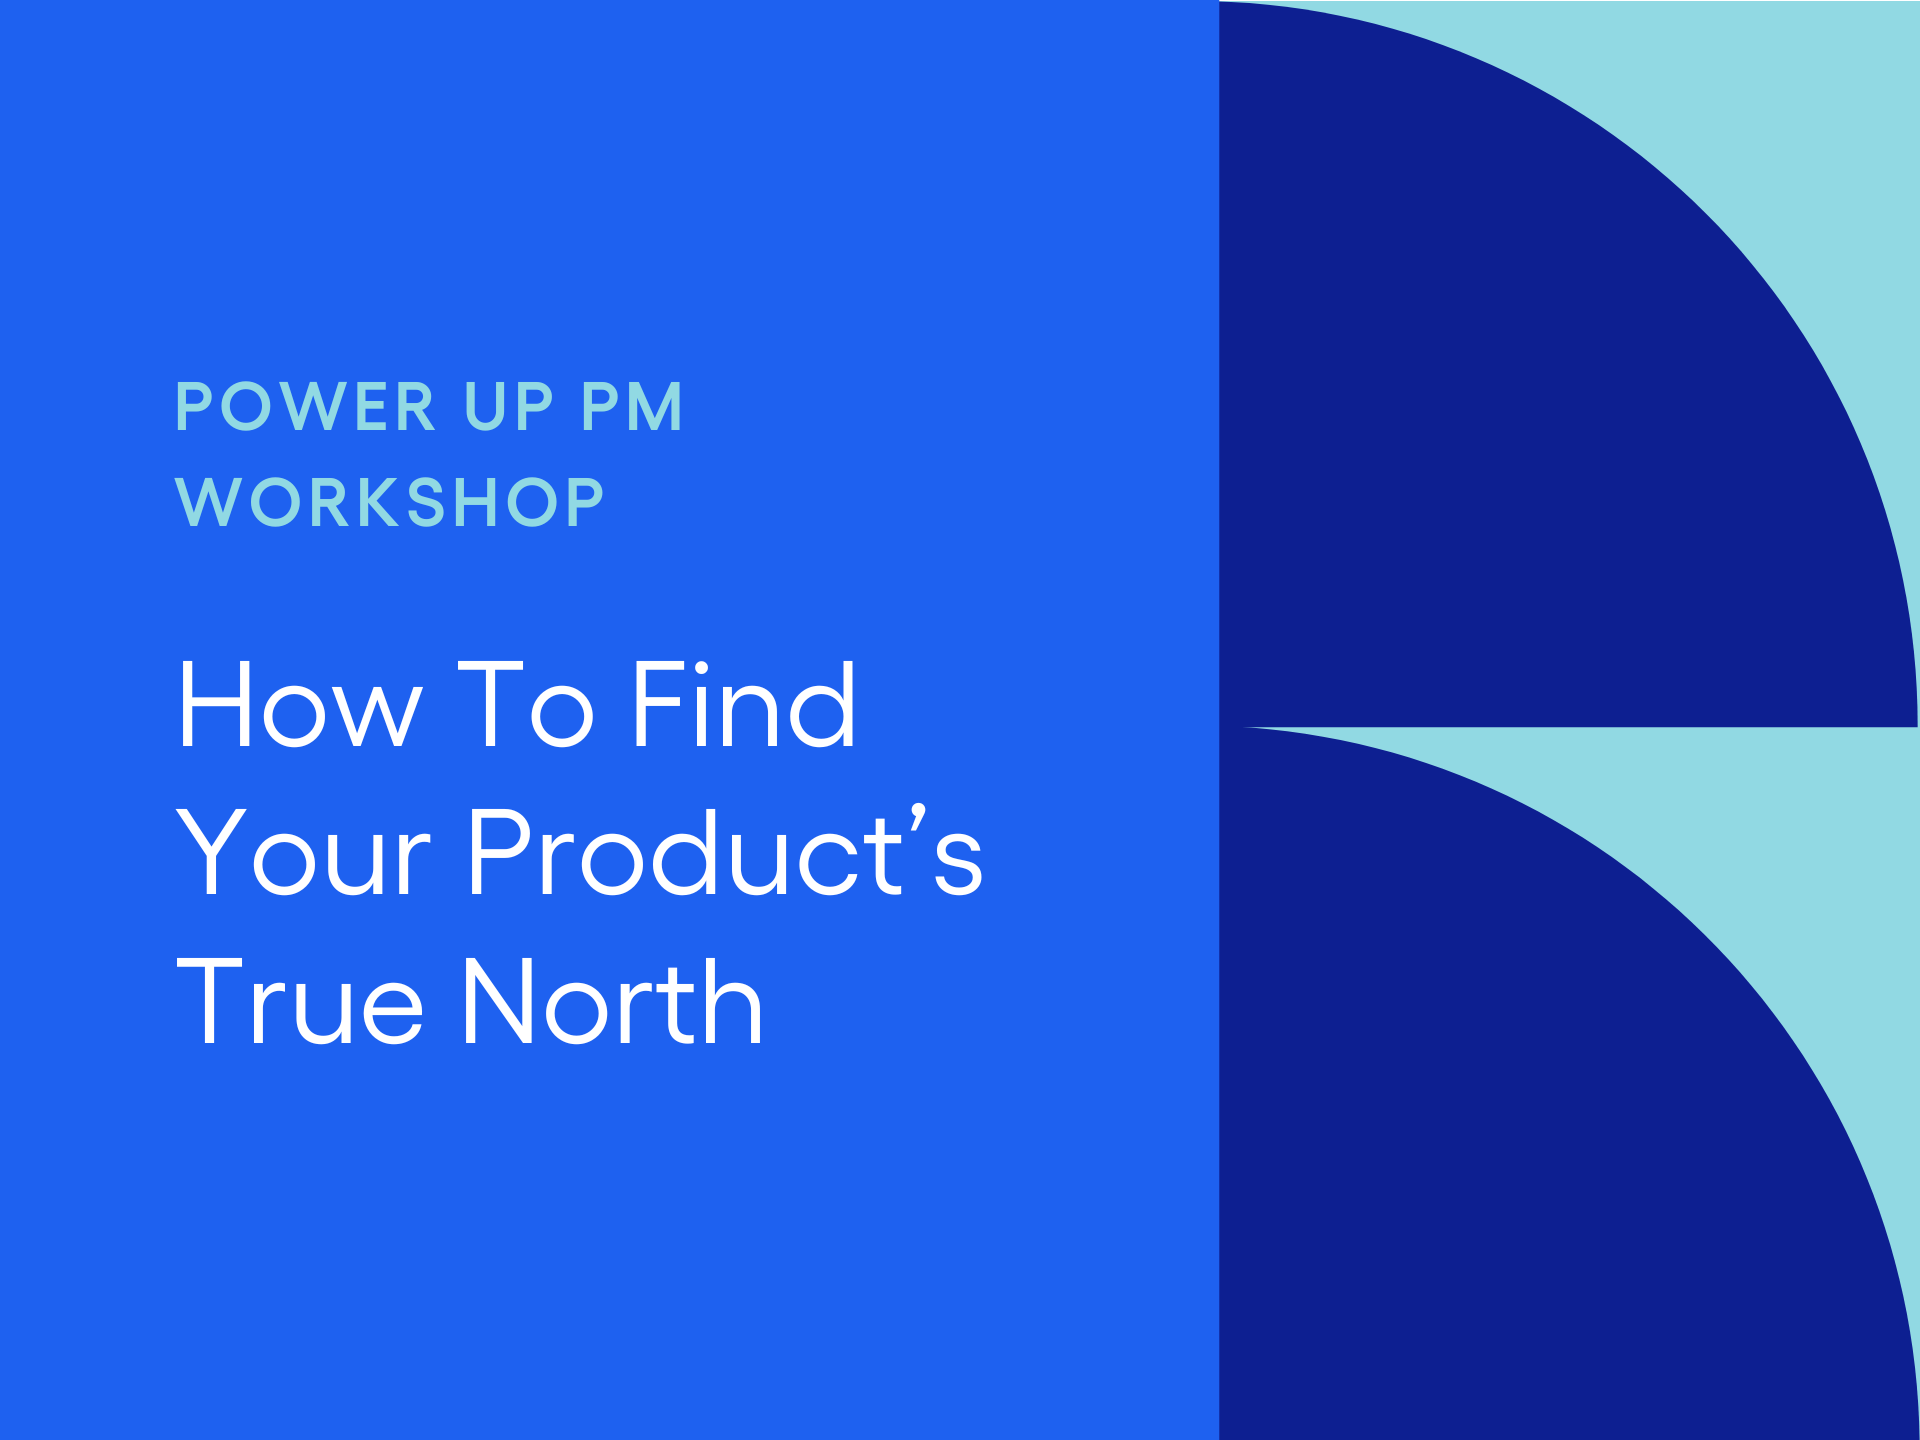 How To Find Your Product’s True North